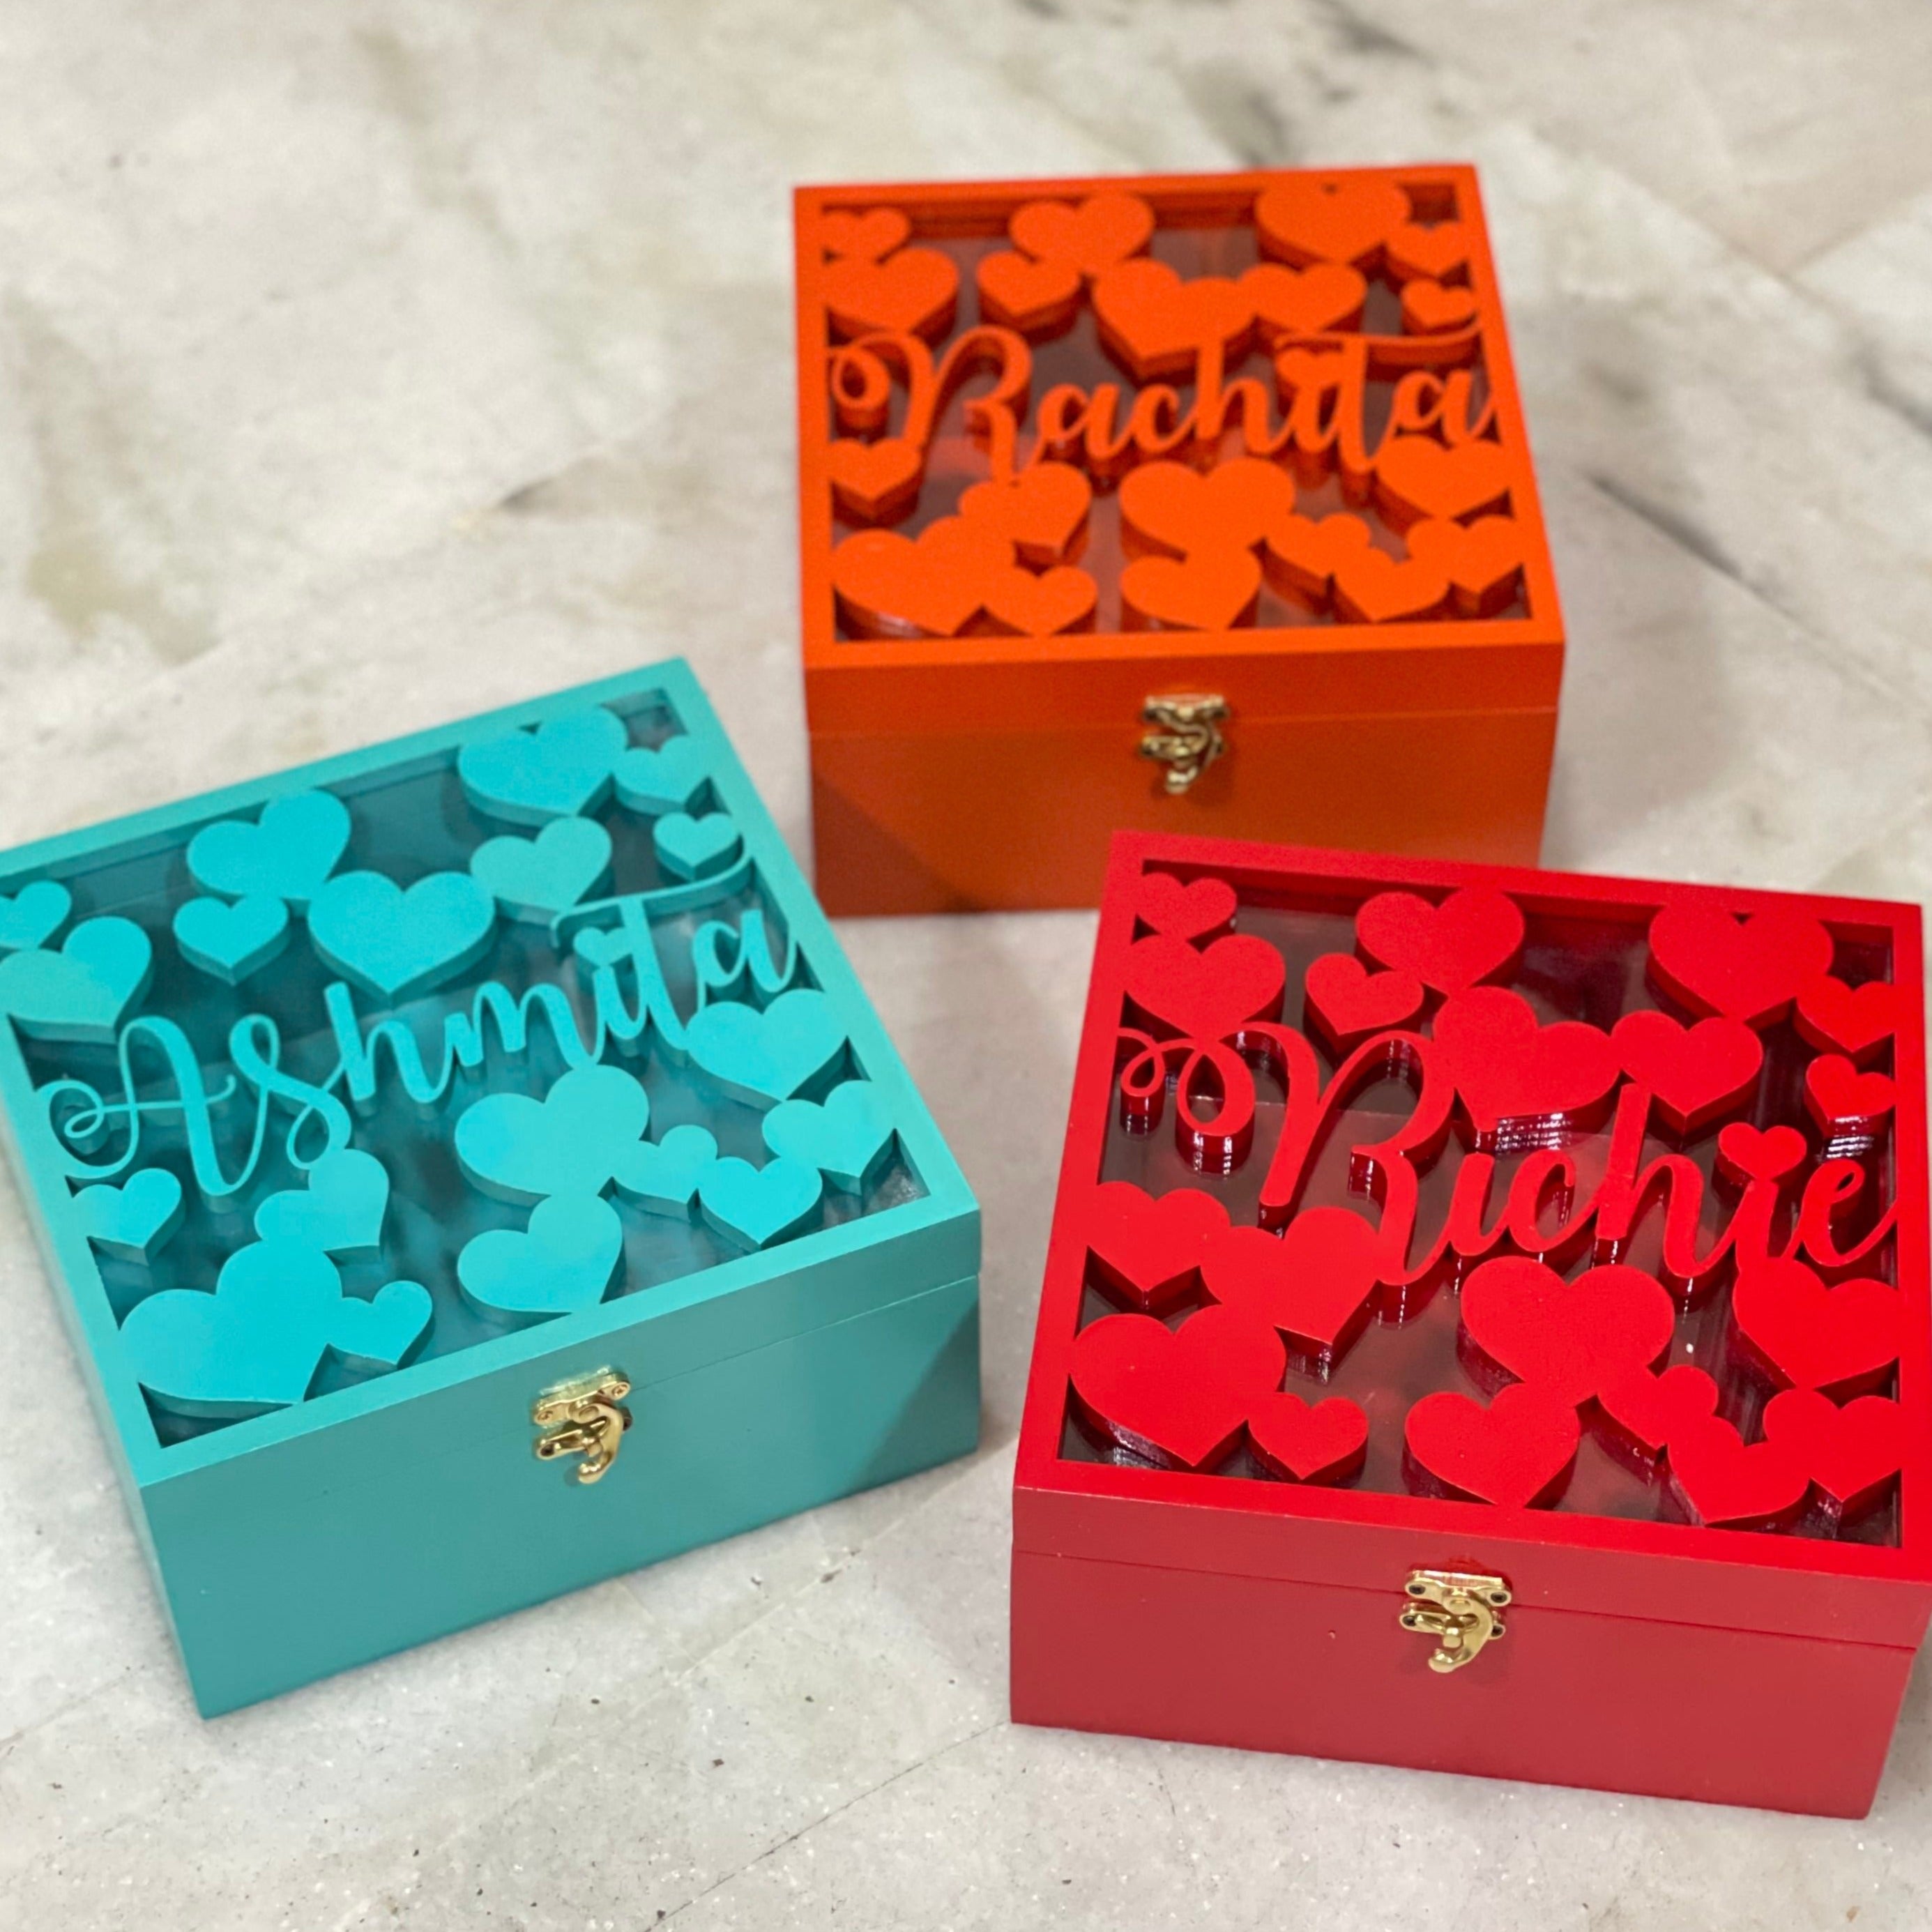 Personalized Name Box